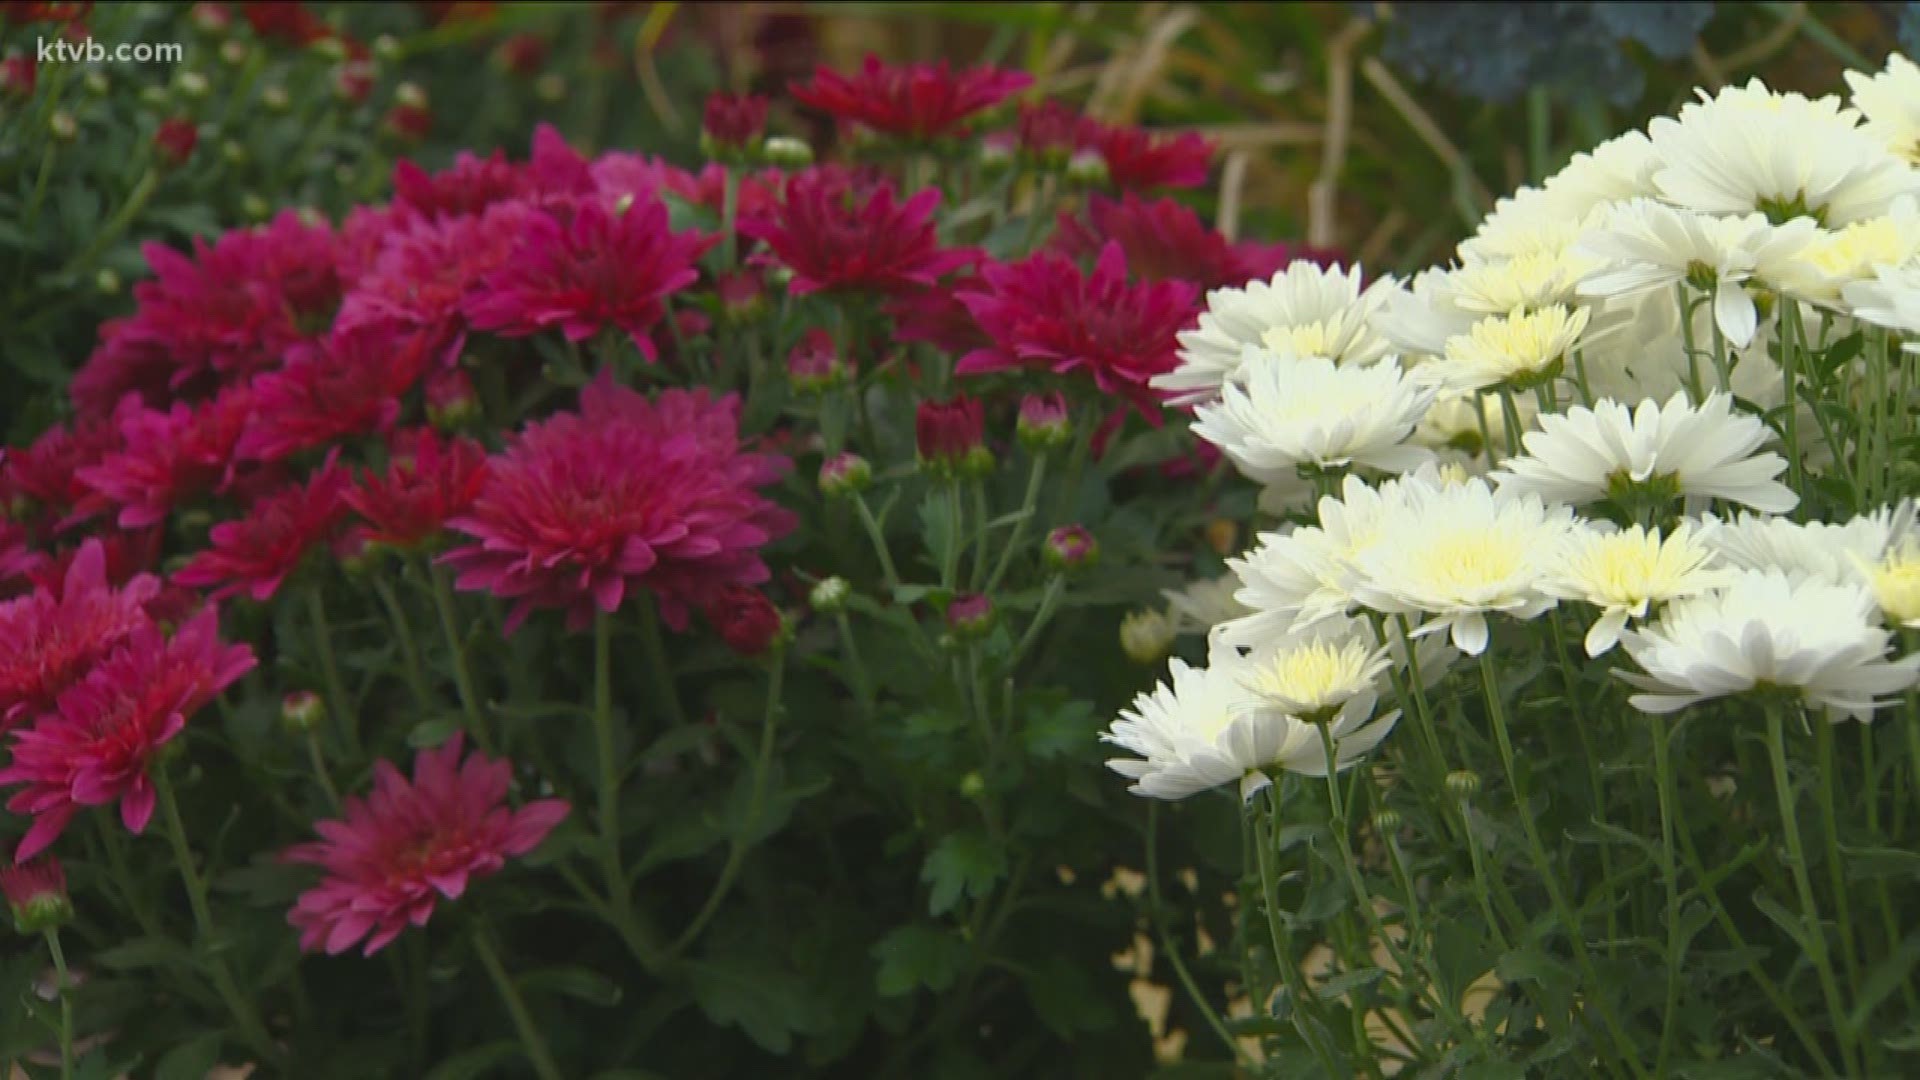 Jim Duthie gives an idea of which plants can bring a splash of color to your yard and garden.